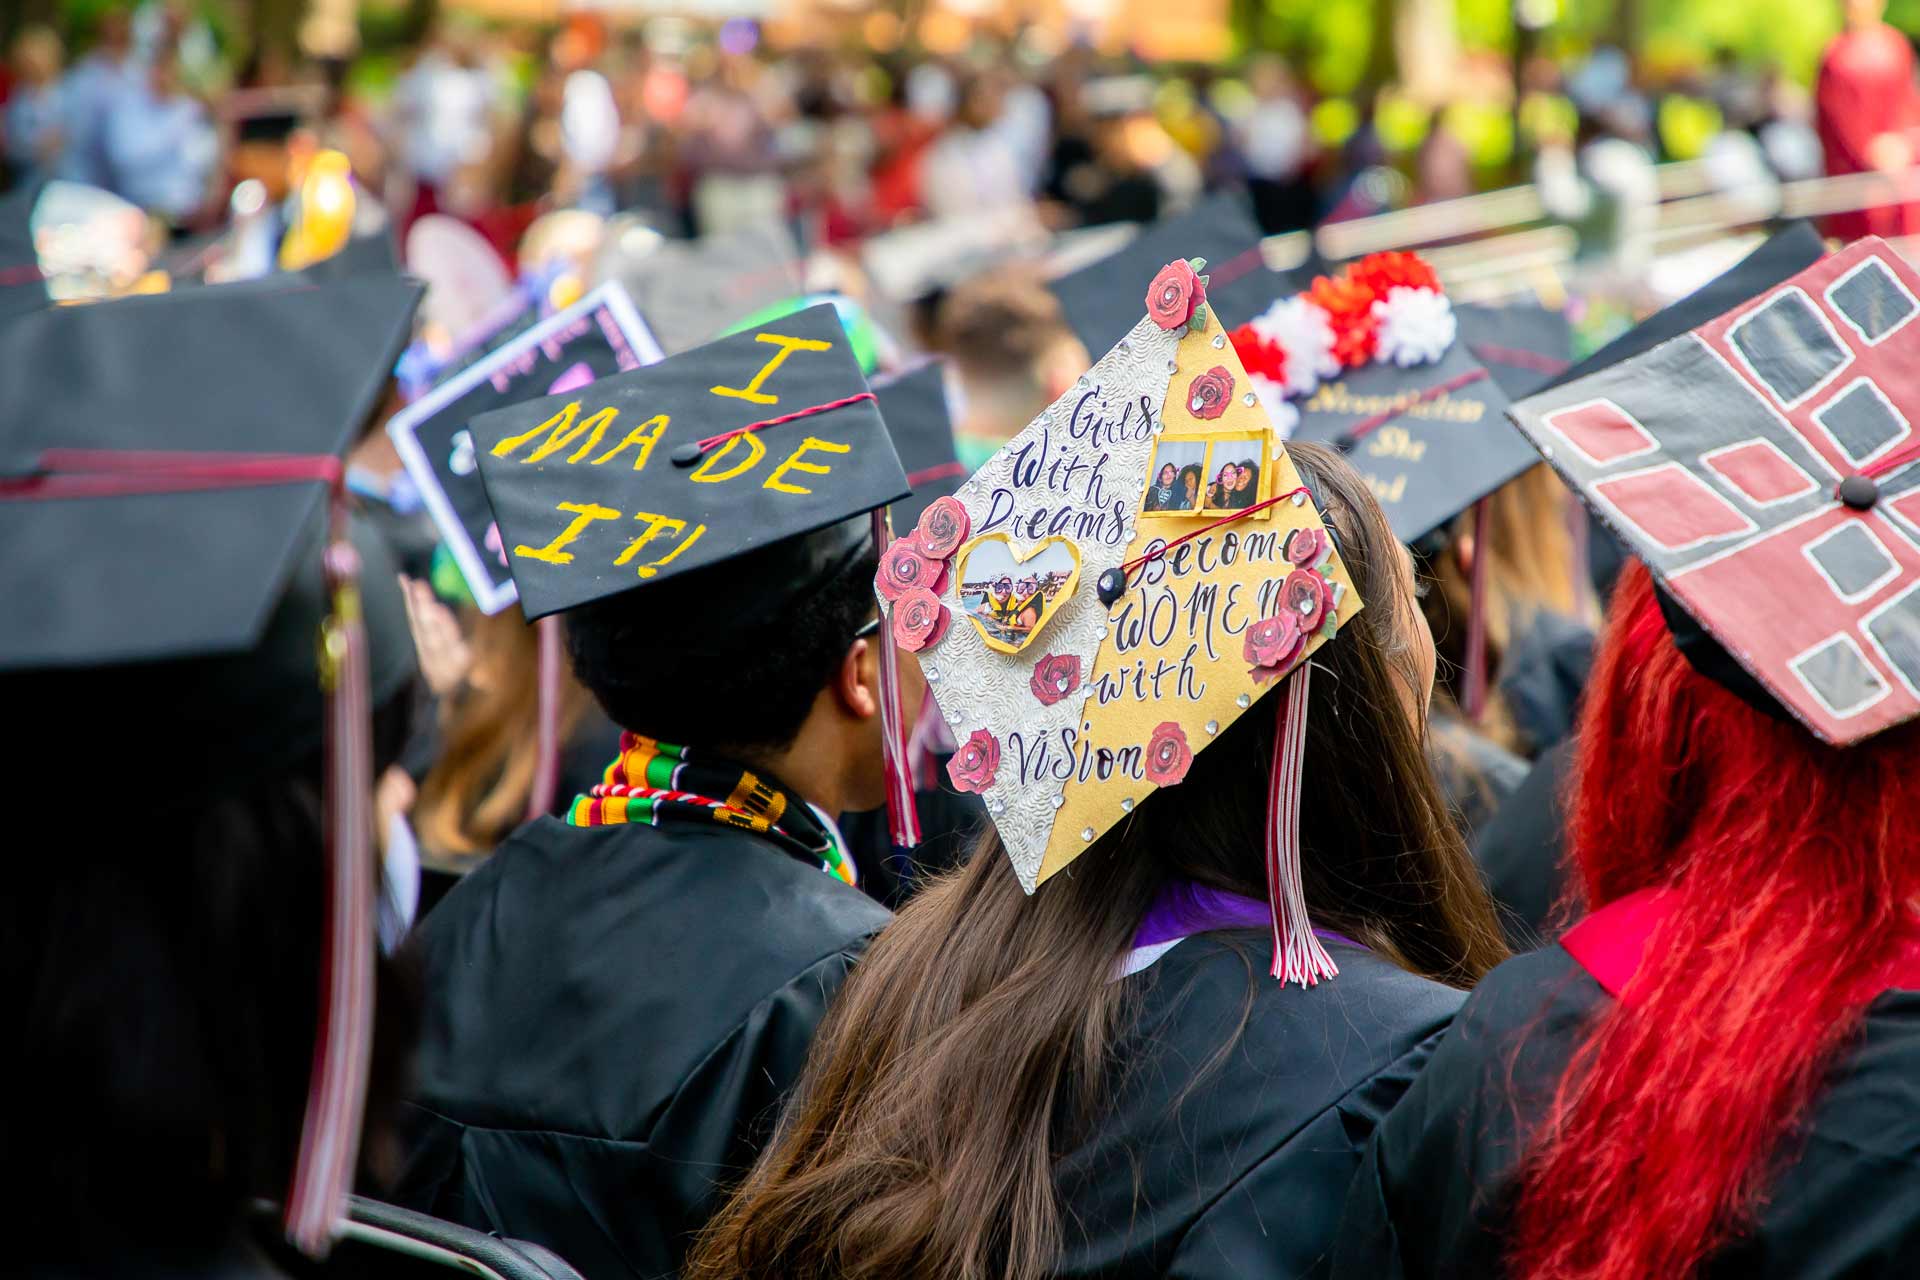 Students' mortar boards read, "I made it!" and "Girls with dreams become women with vision."